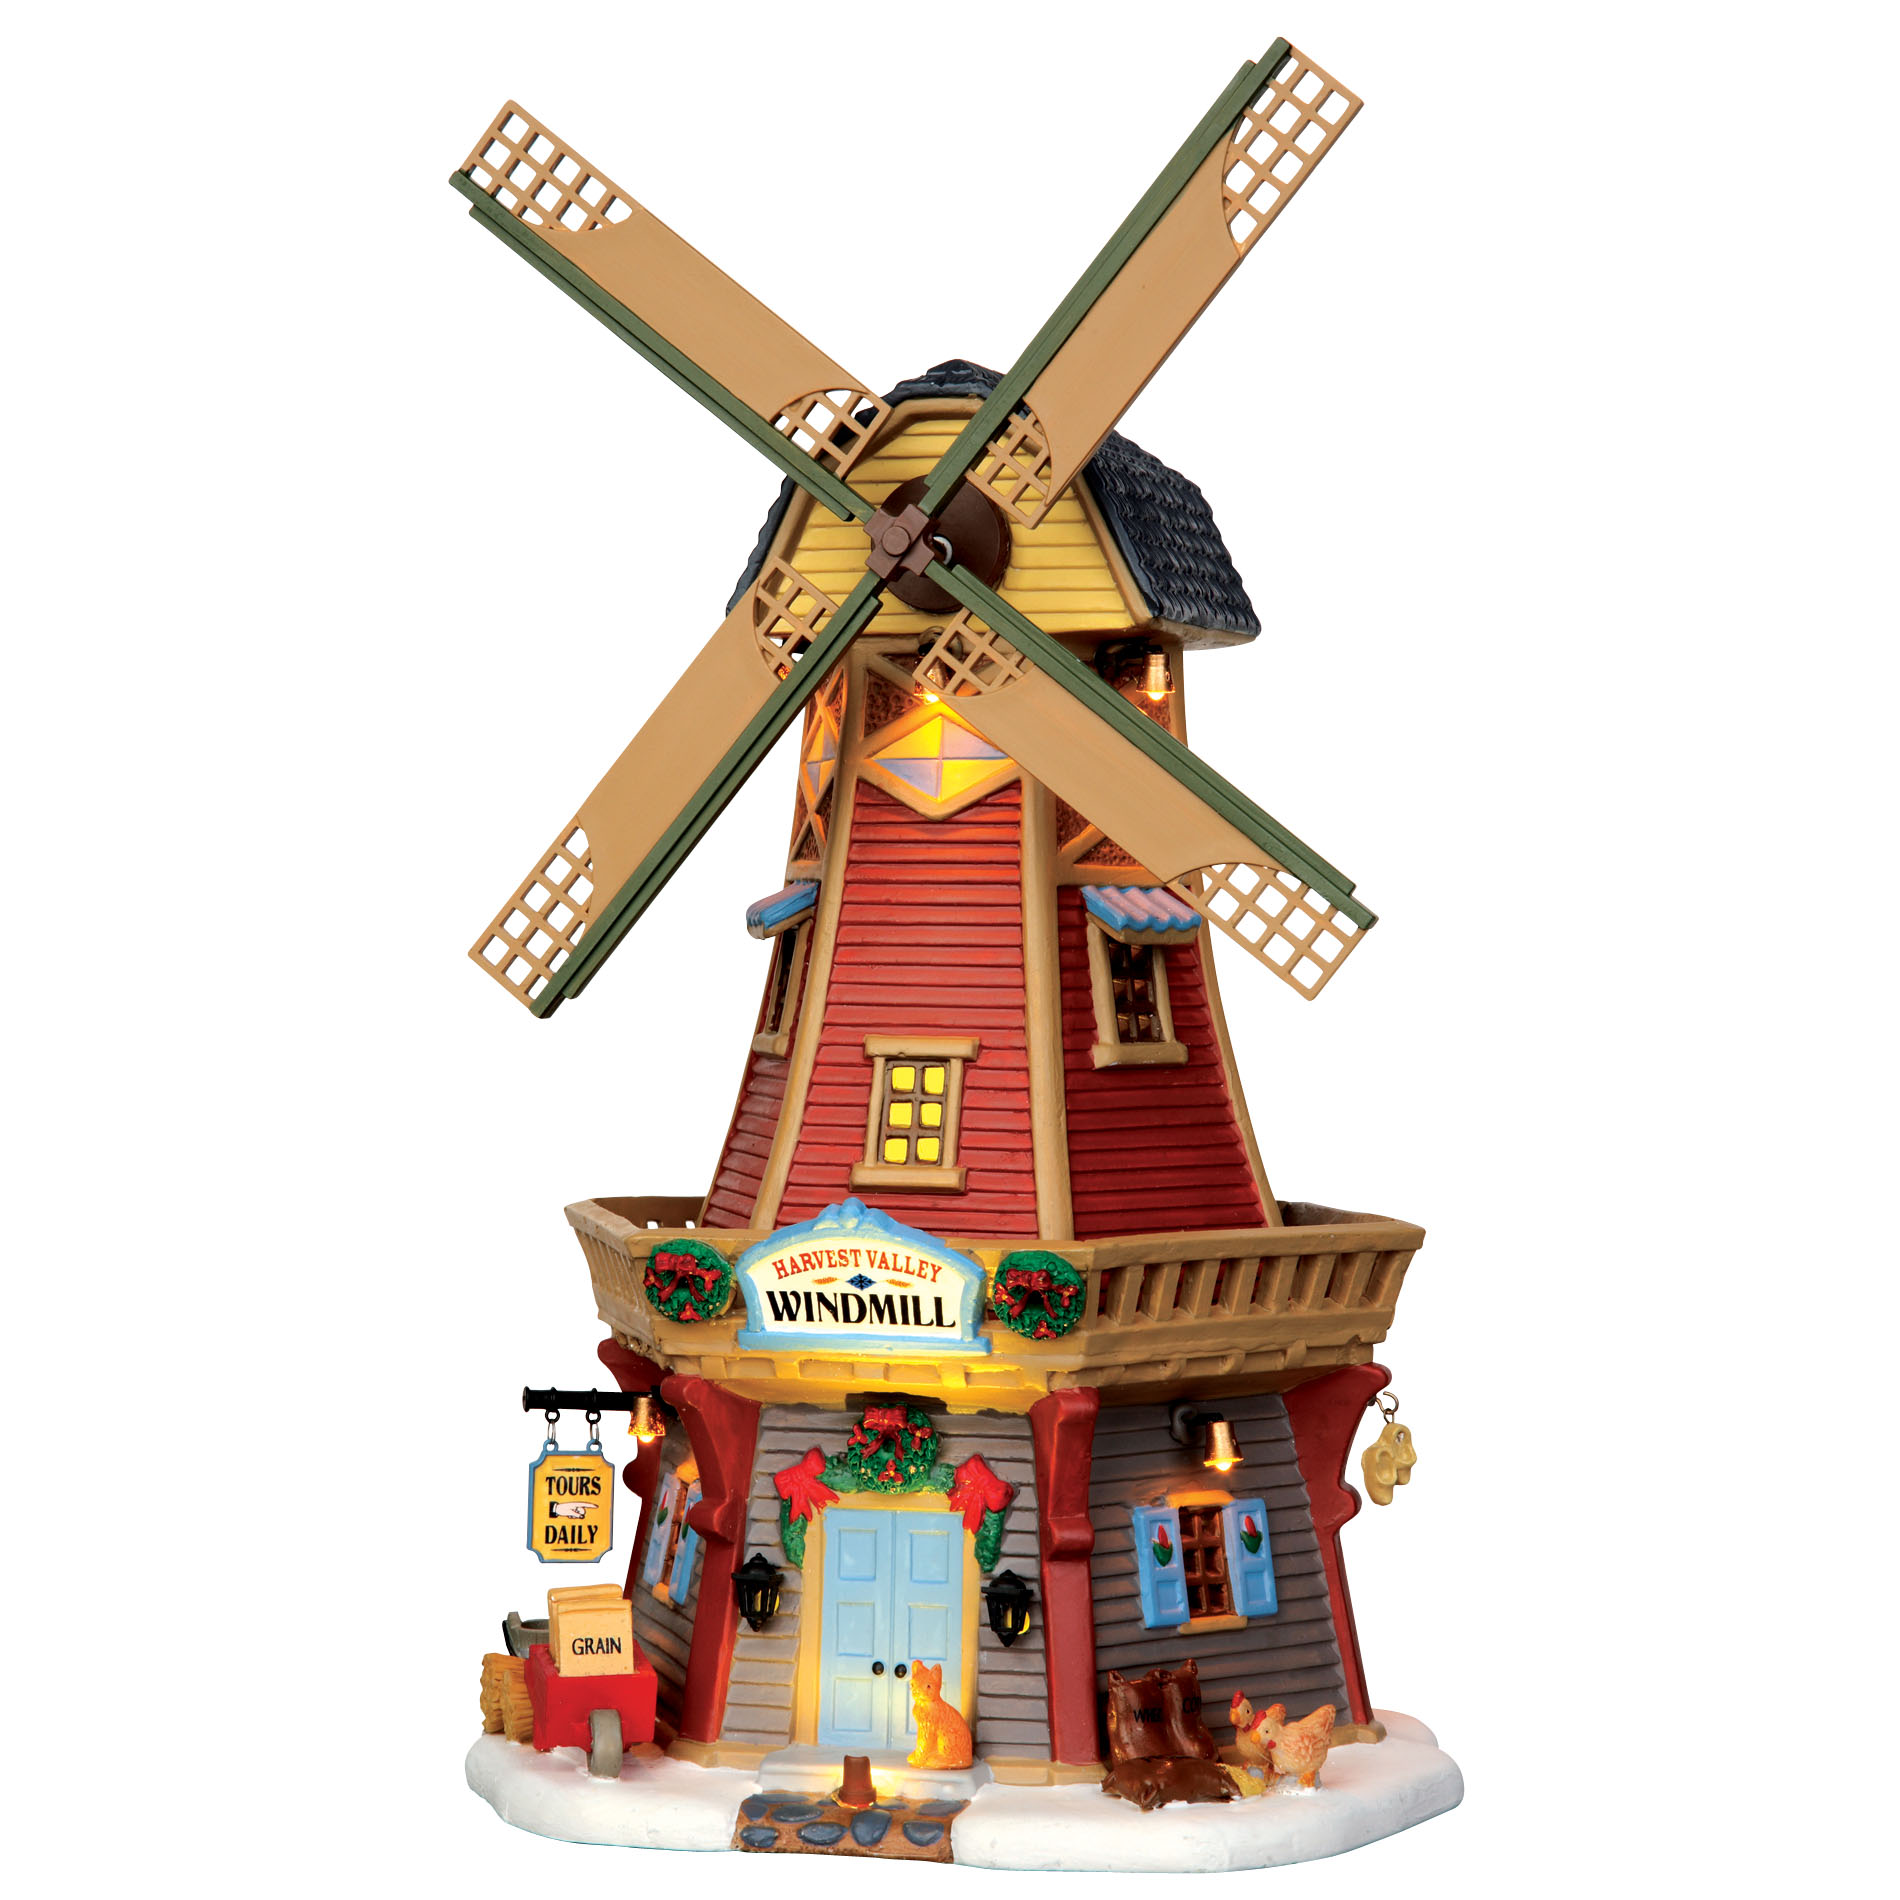 Christmas Village Building  Harvest Valley Windmill  With 4.5V Adaptor